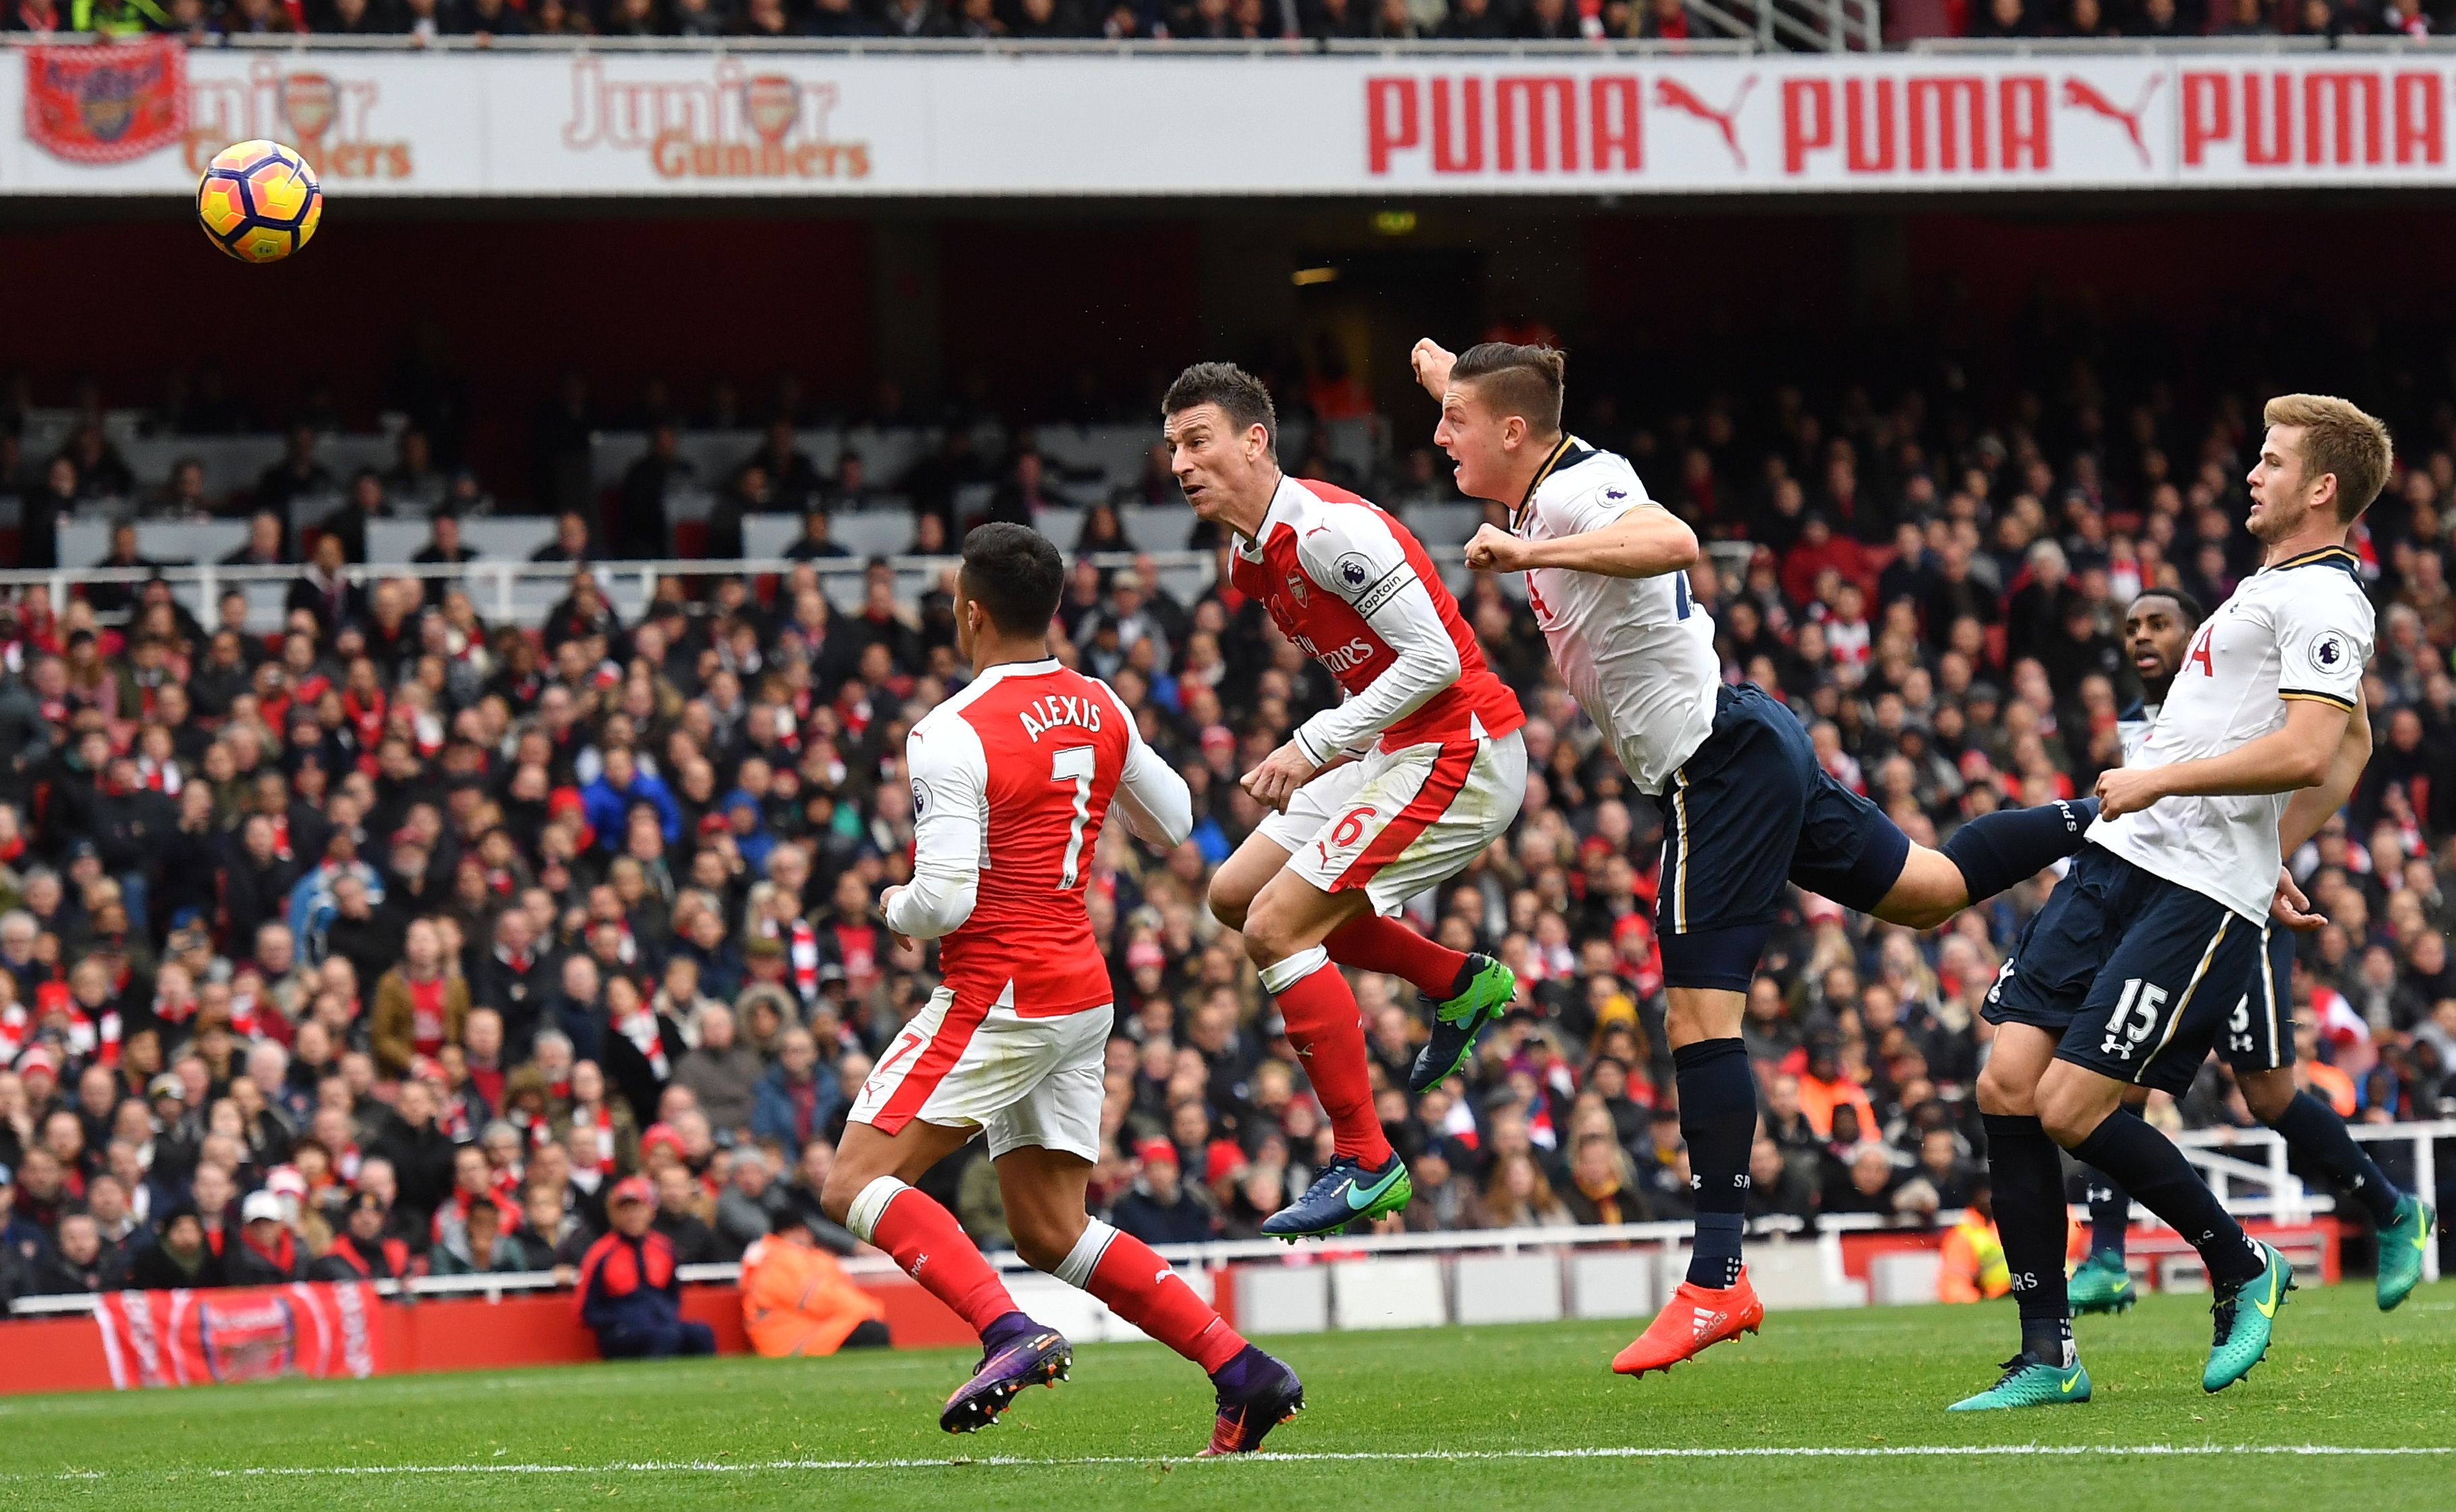 Tottenham Hotspur's Austrian defender Kevin Wimmer (2R) heads the ball past Arsenal's Chilean striker Alexis Sanchez (L) and Arsenal's French defender Laurent Koscielny (2L) to score an own goal during the English Premier League football match between Arsenal and Tottenham Hotspur at the Emirates Stadium in London on November 6, 2016.  / AFP / BEN STANSALL / RESTRICTED TO EDITORIAL USE. No use with unauthorized audio, video, data, fixture lists, club/league logos or 'live' services. Online in-match use limited to 75 images, no video emulation. No use in betting, games or single club/league/player publications.  /         (Photo credit should read BEN STANSALL/AFP/Getty Images)